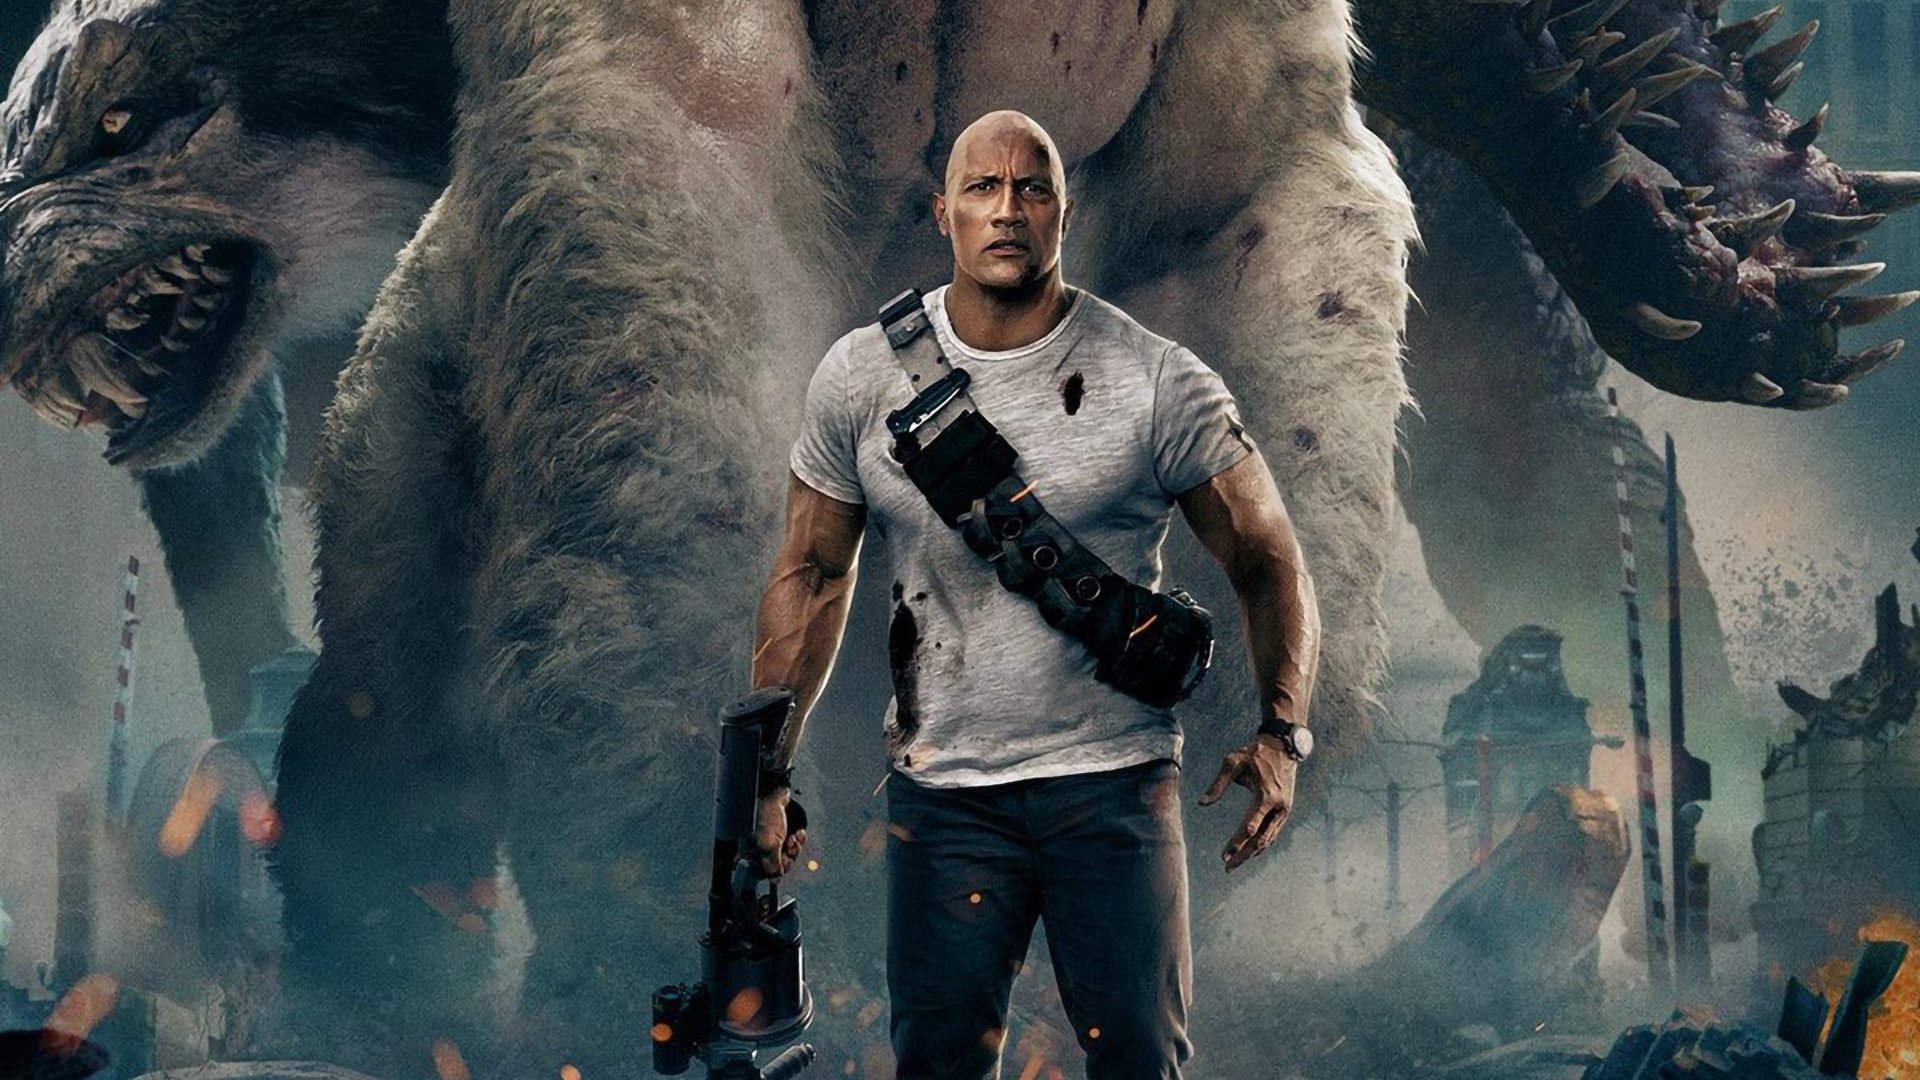 Dwayne ‘The Rock’ Johnson says he’s starring in another video game